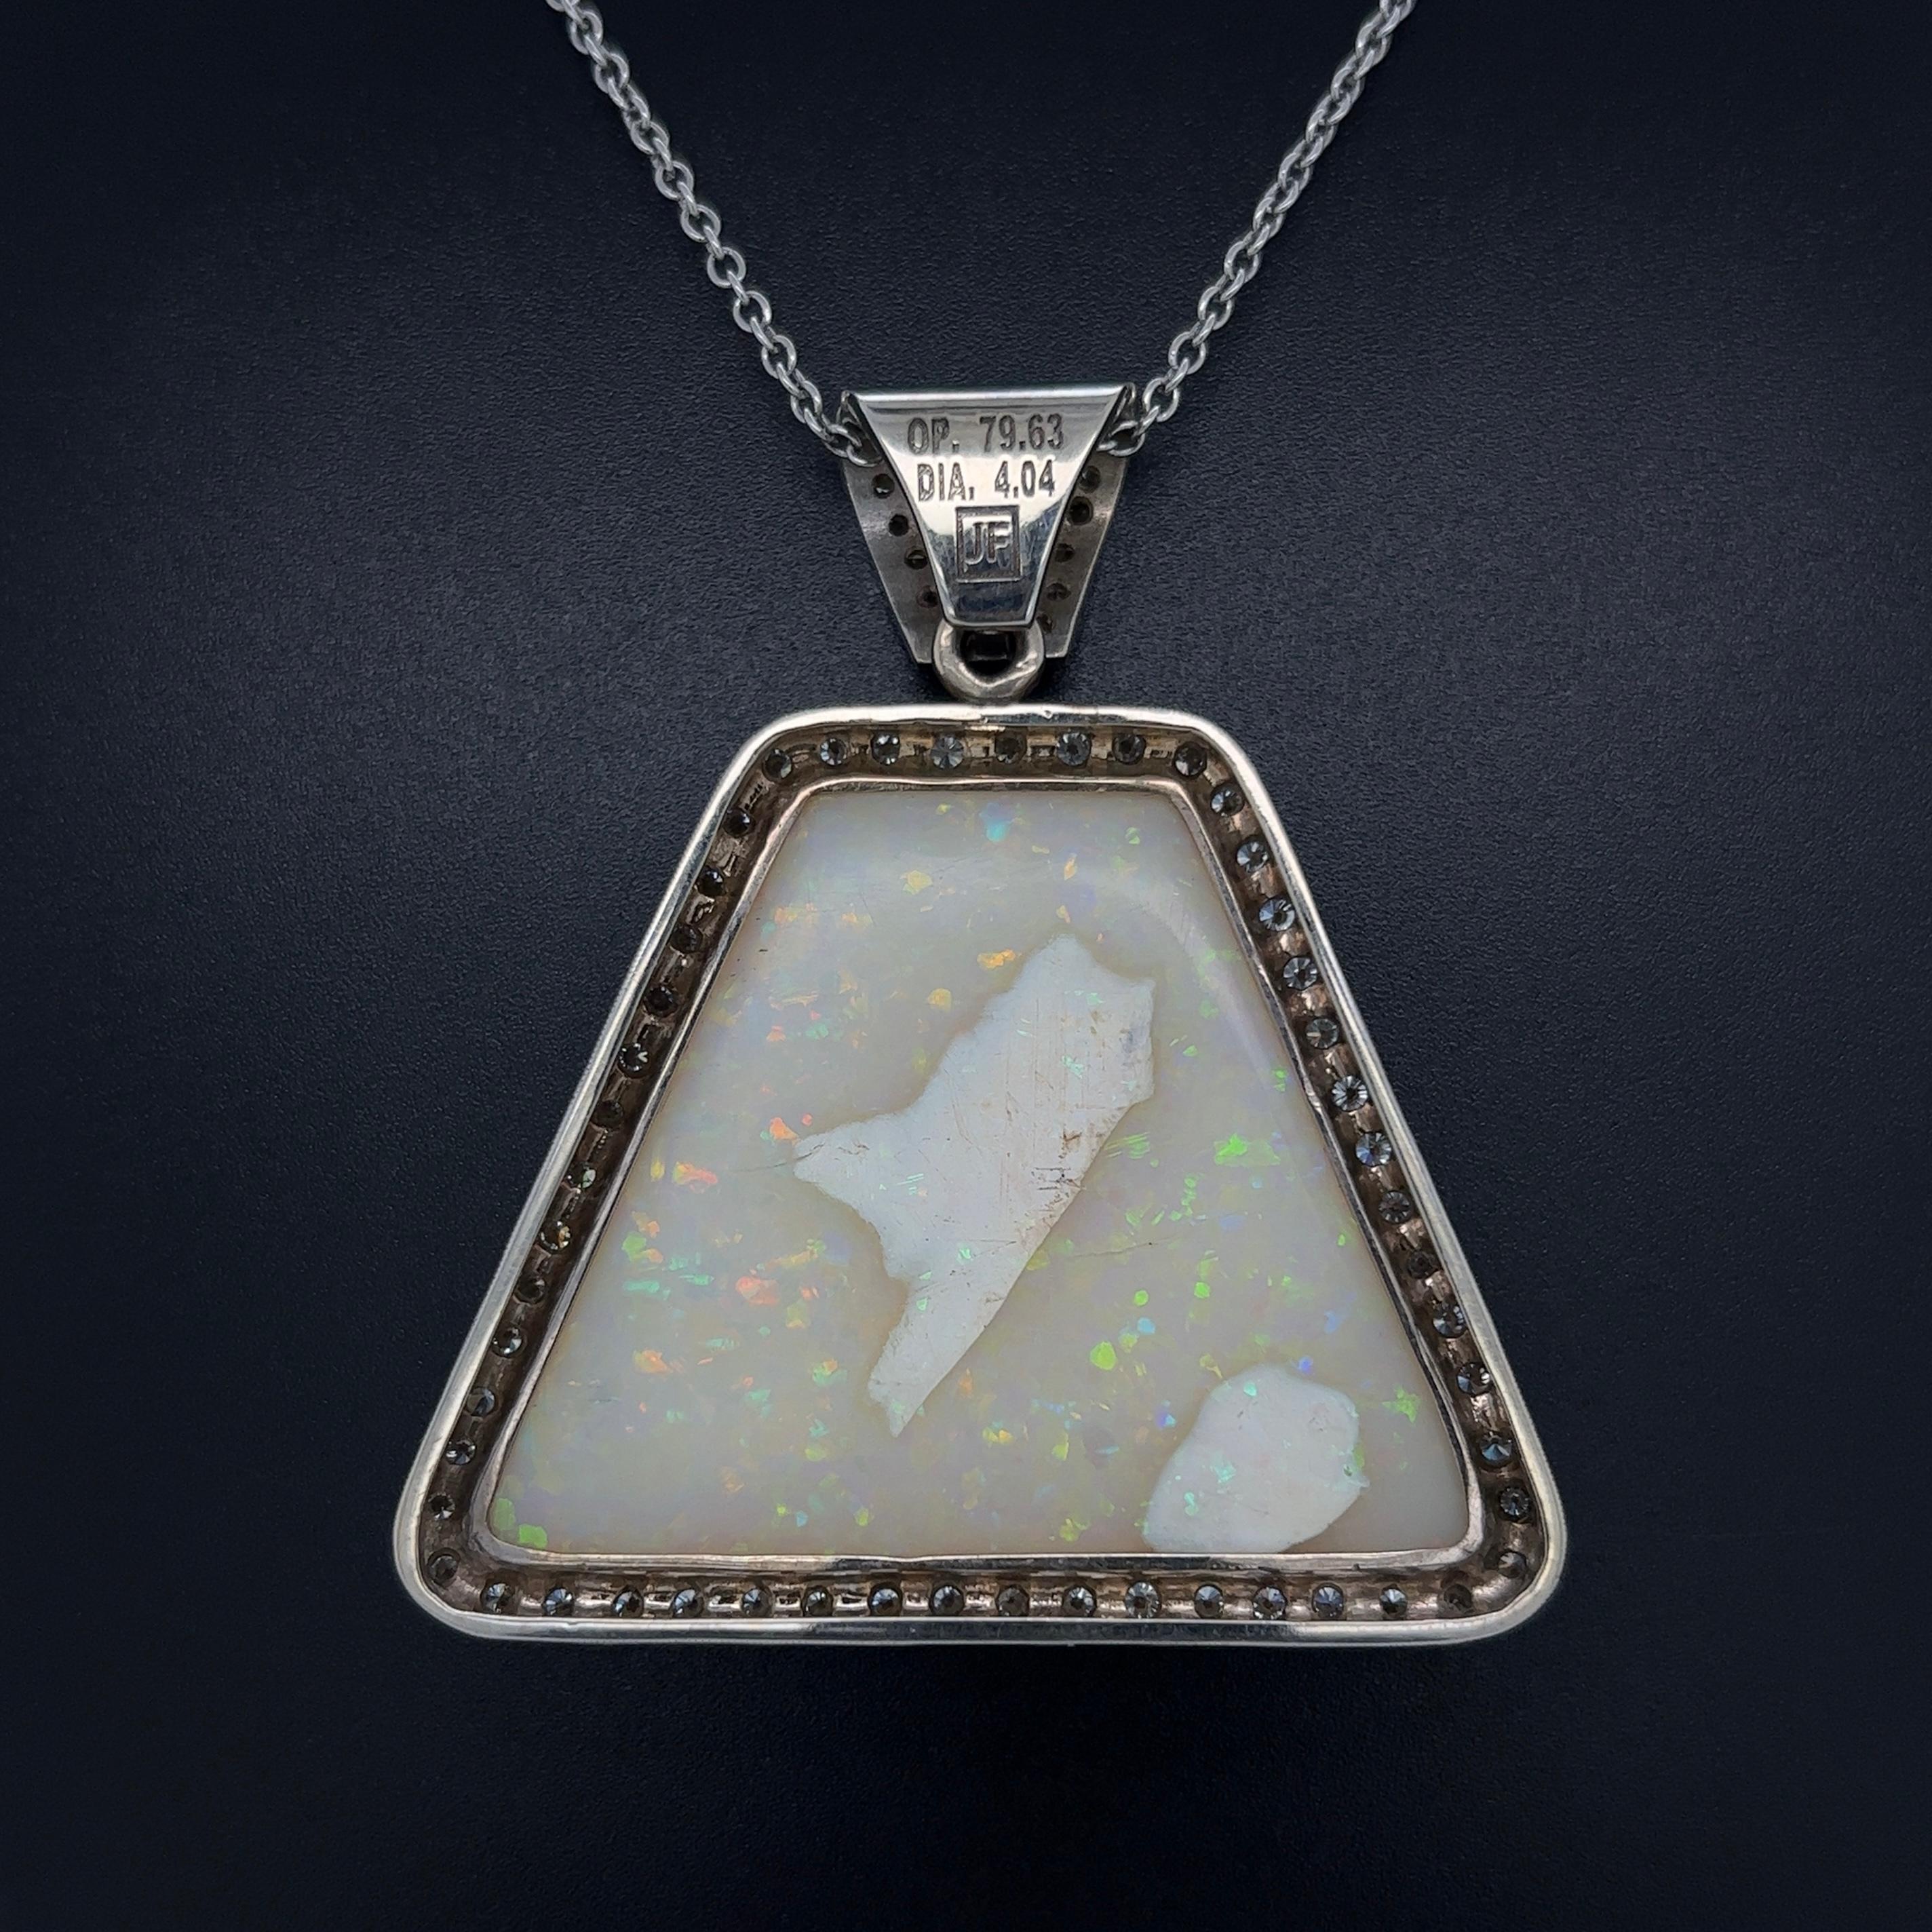 79.63 Carat Trapezoid Australian Opal and Diamond Gold Pendant Necklace Estate In Excellent Condition For Sale In Montreal, QC